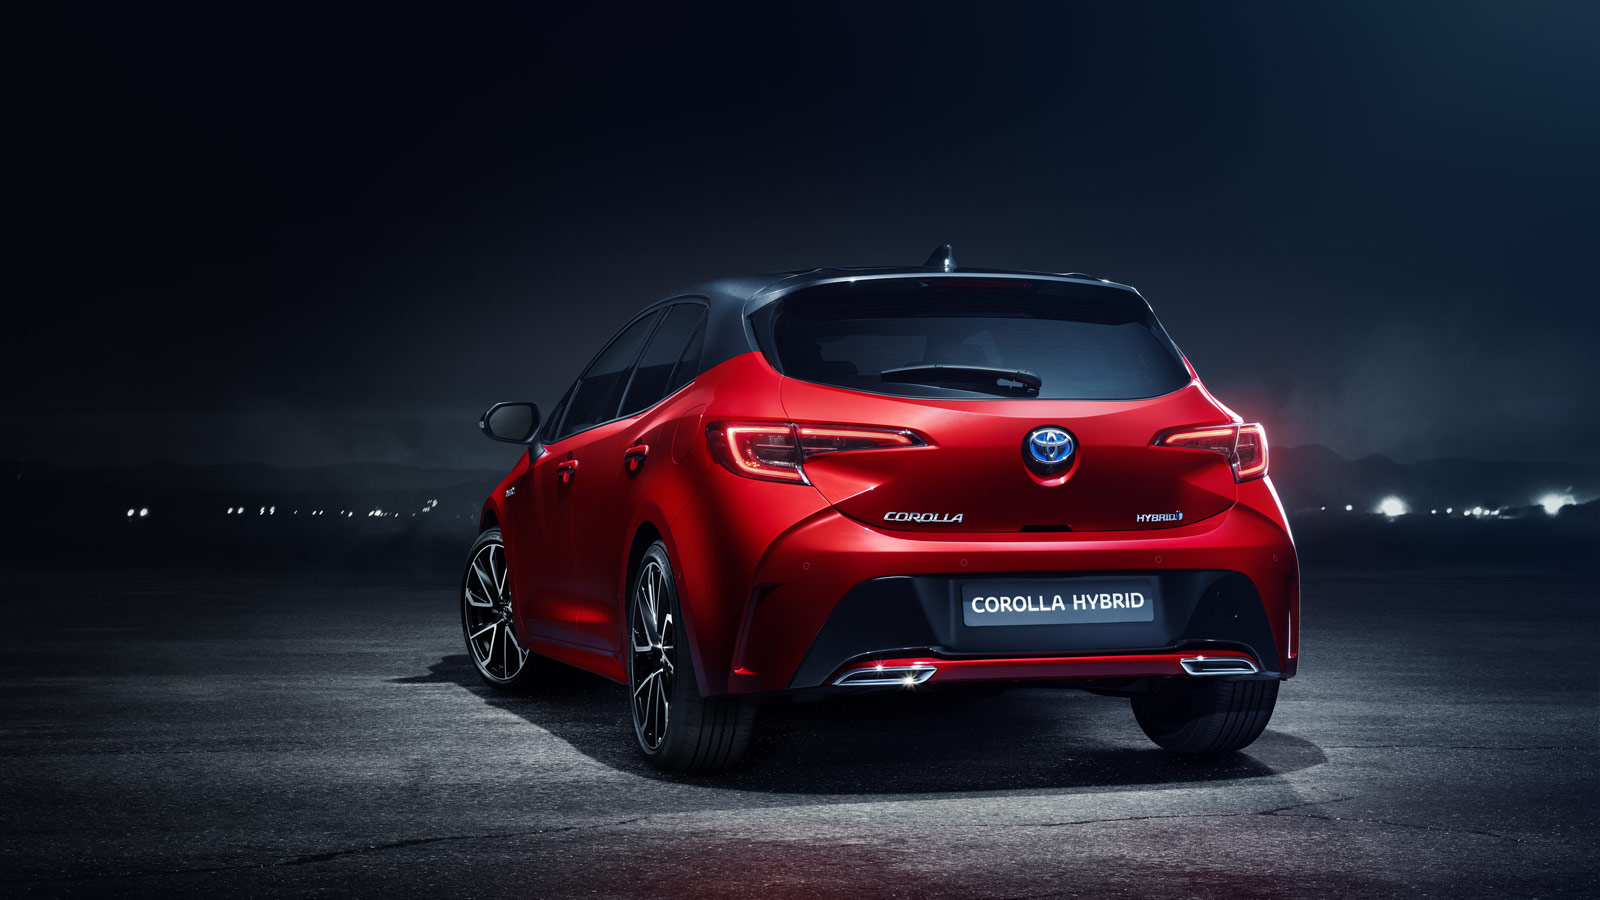 An exciting new era for Corolla